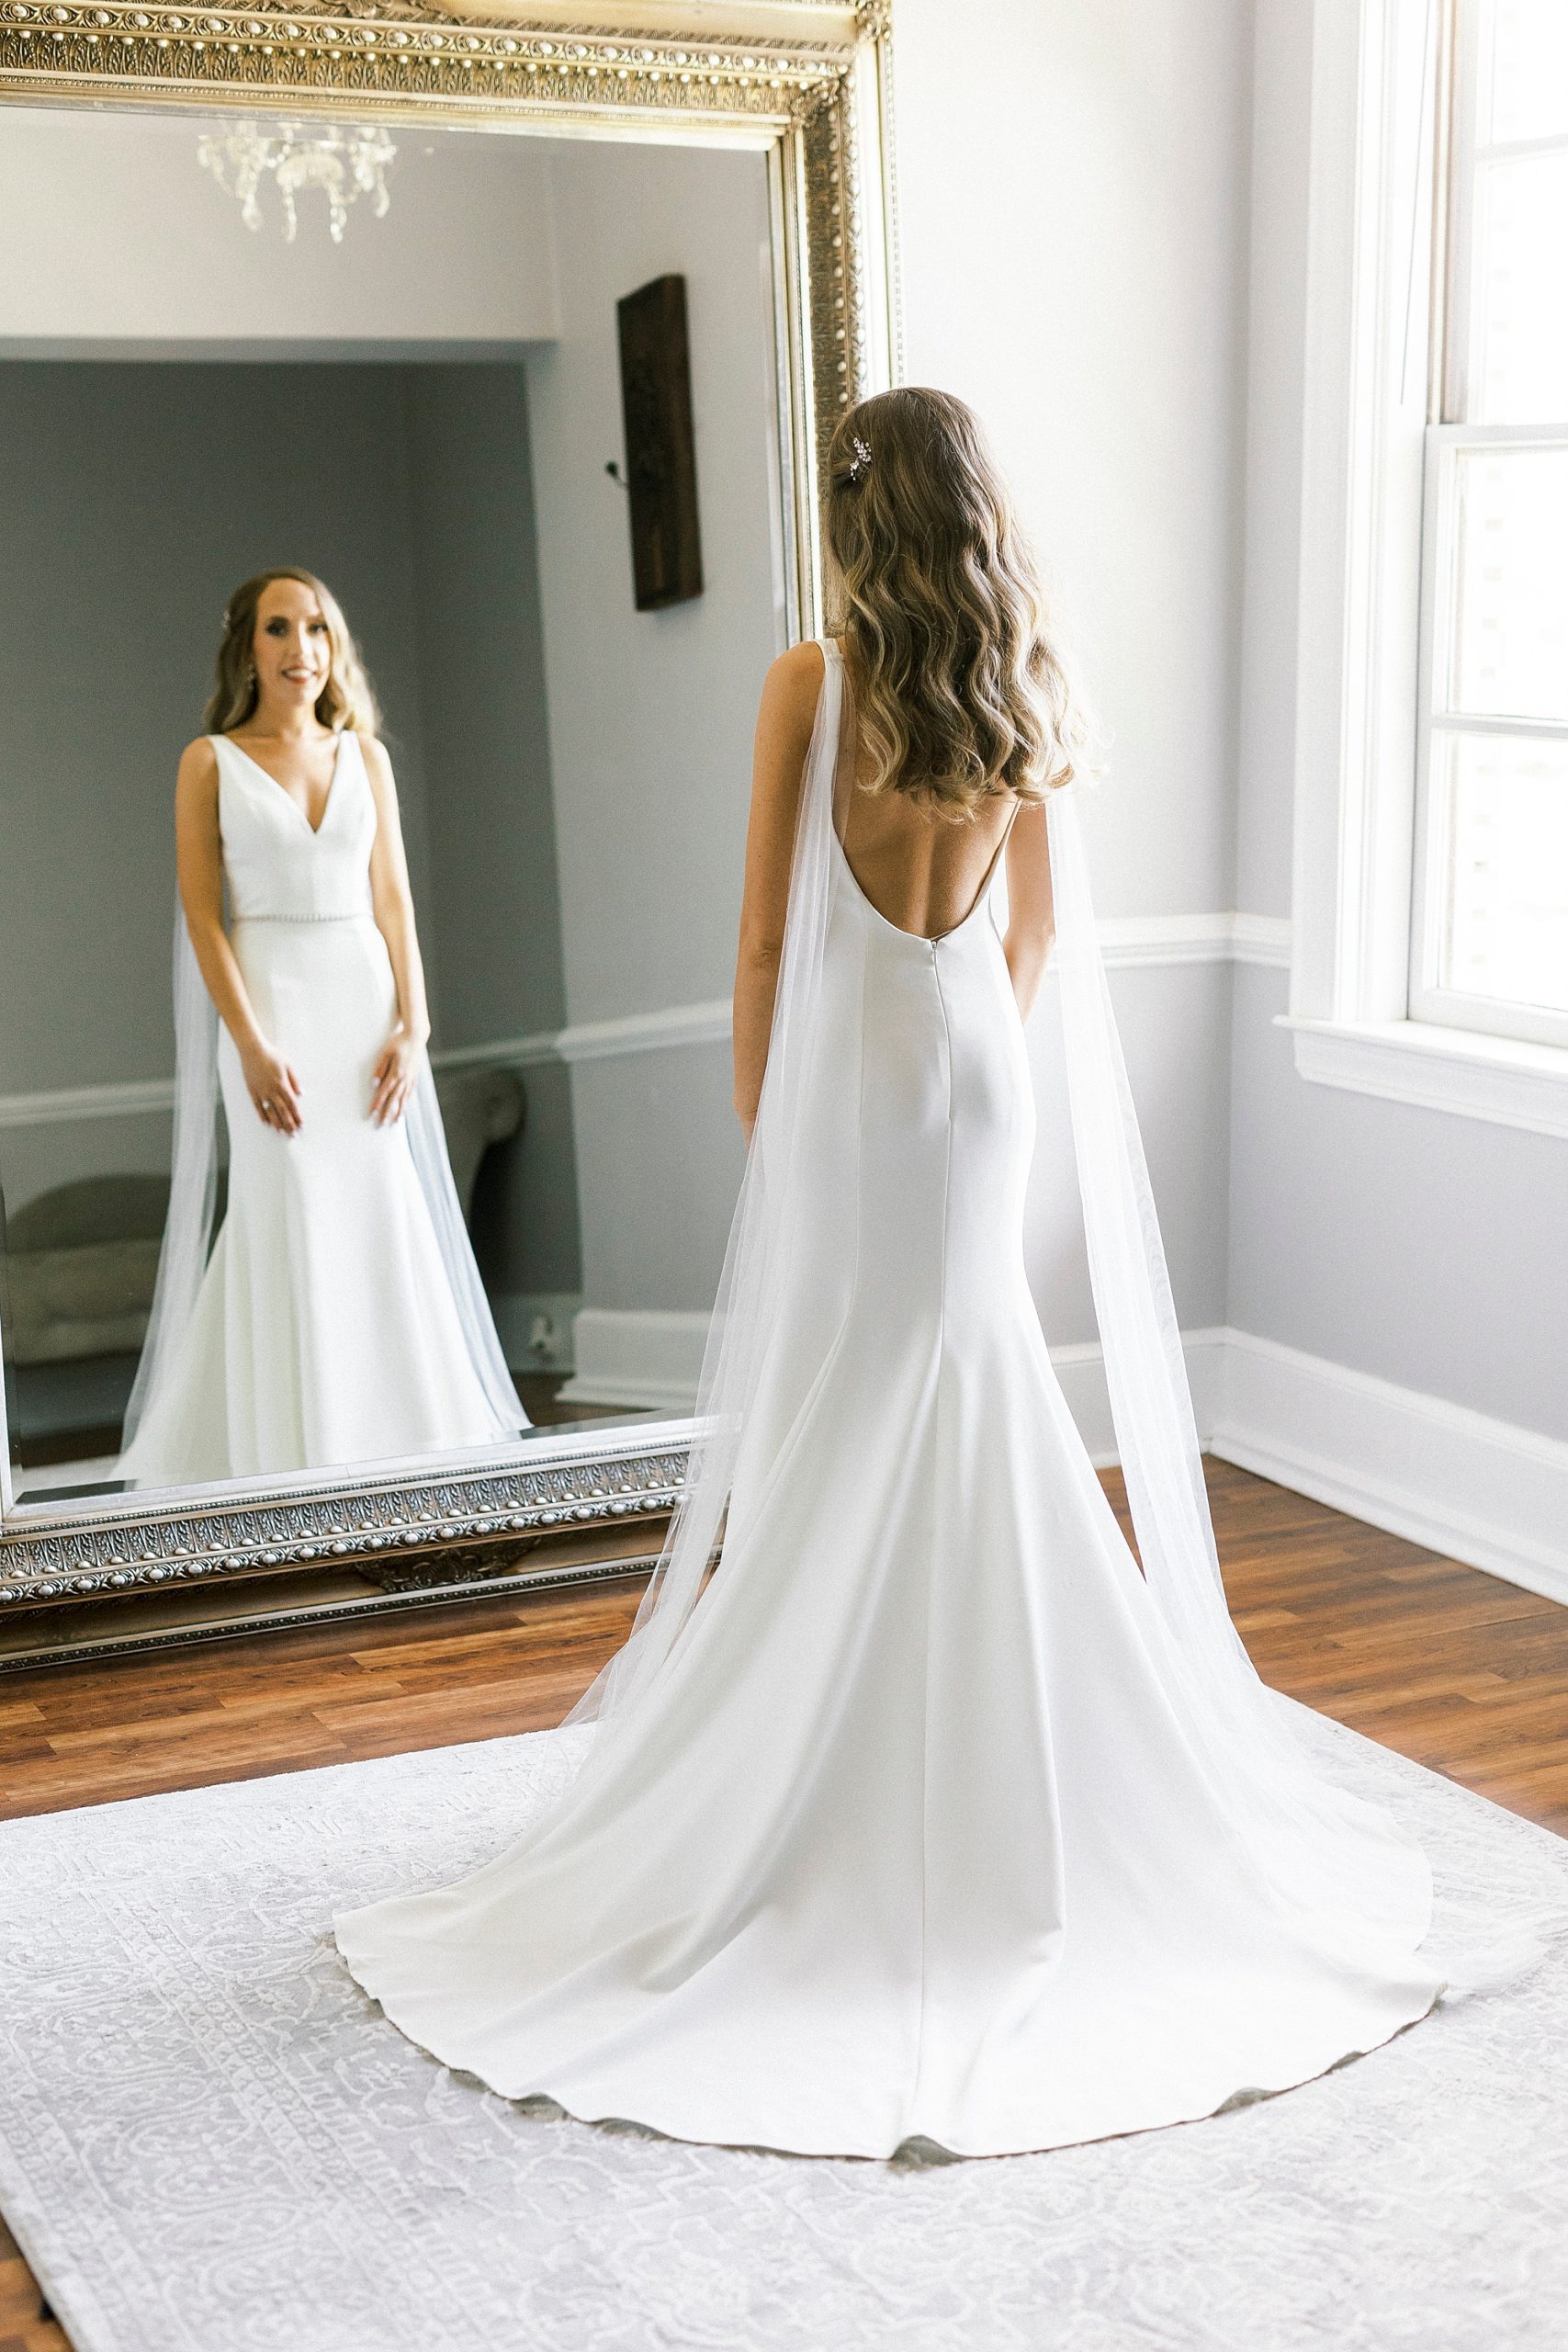 bride looks at herself in gold mirror at Separk Mansion with sleek wedding gown